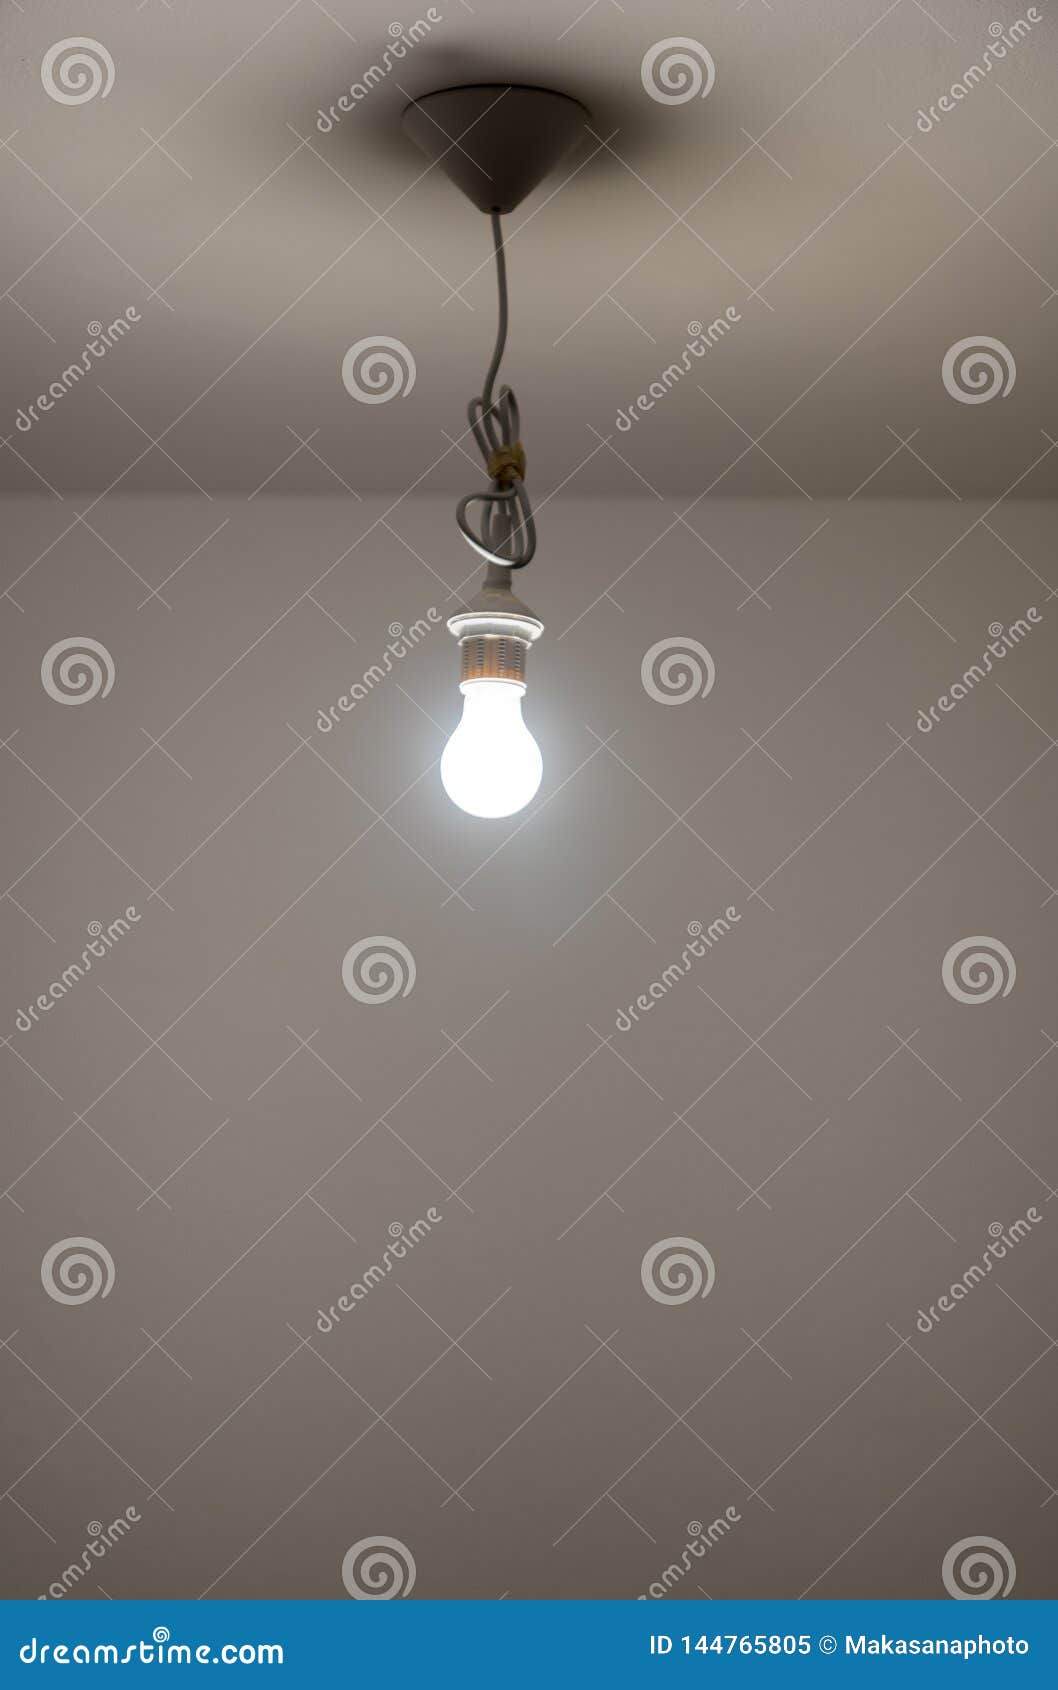 Naked Lit Light Bulb Hanging From The Ceiling Of A Dimly Lit Room